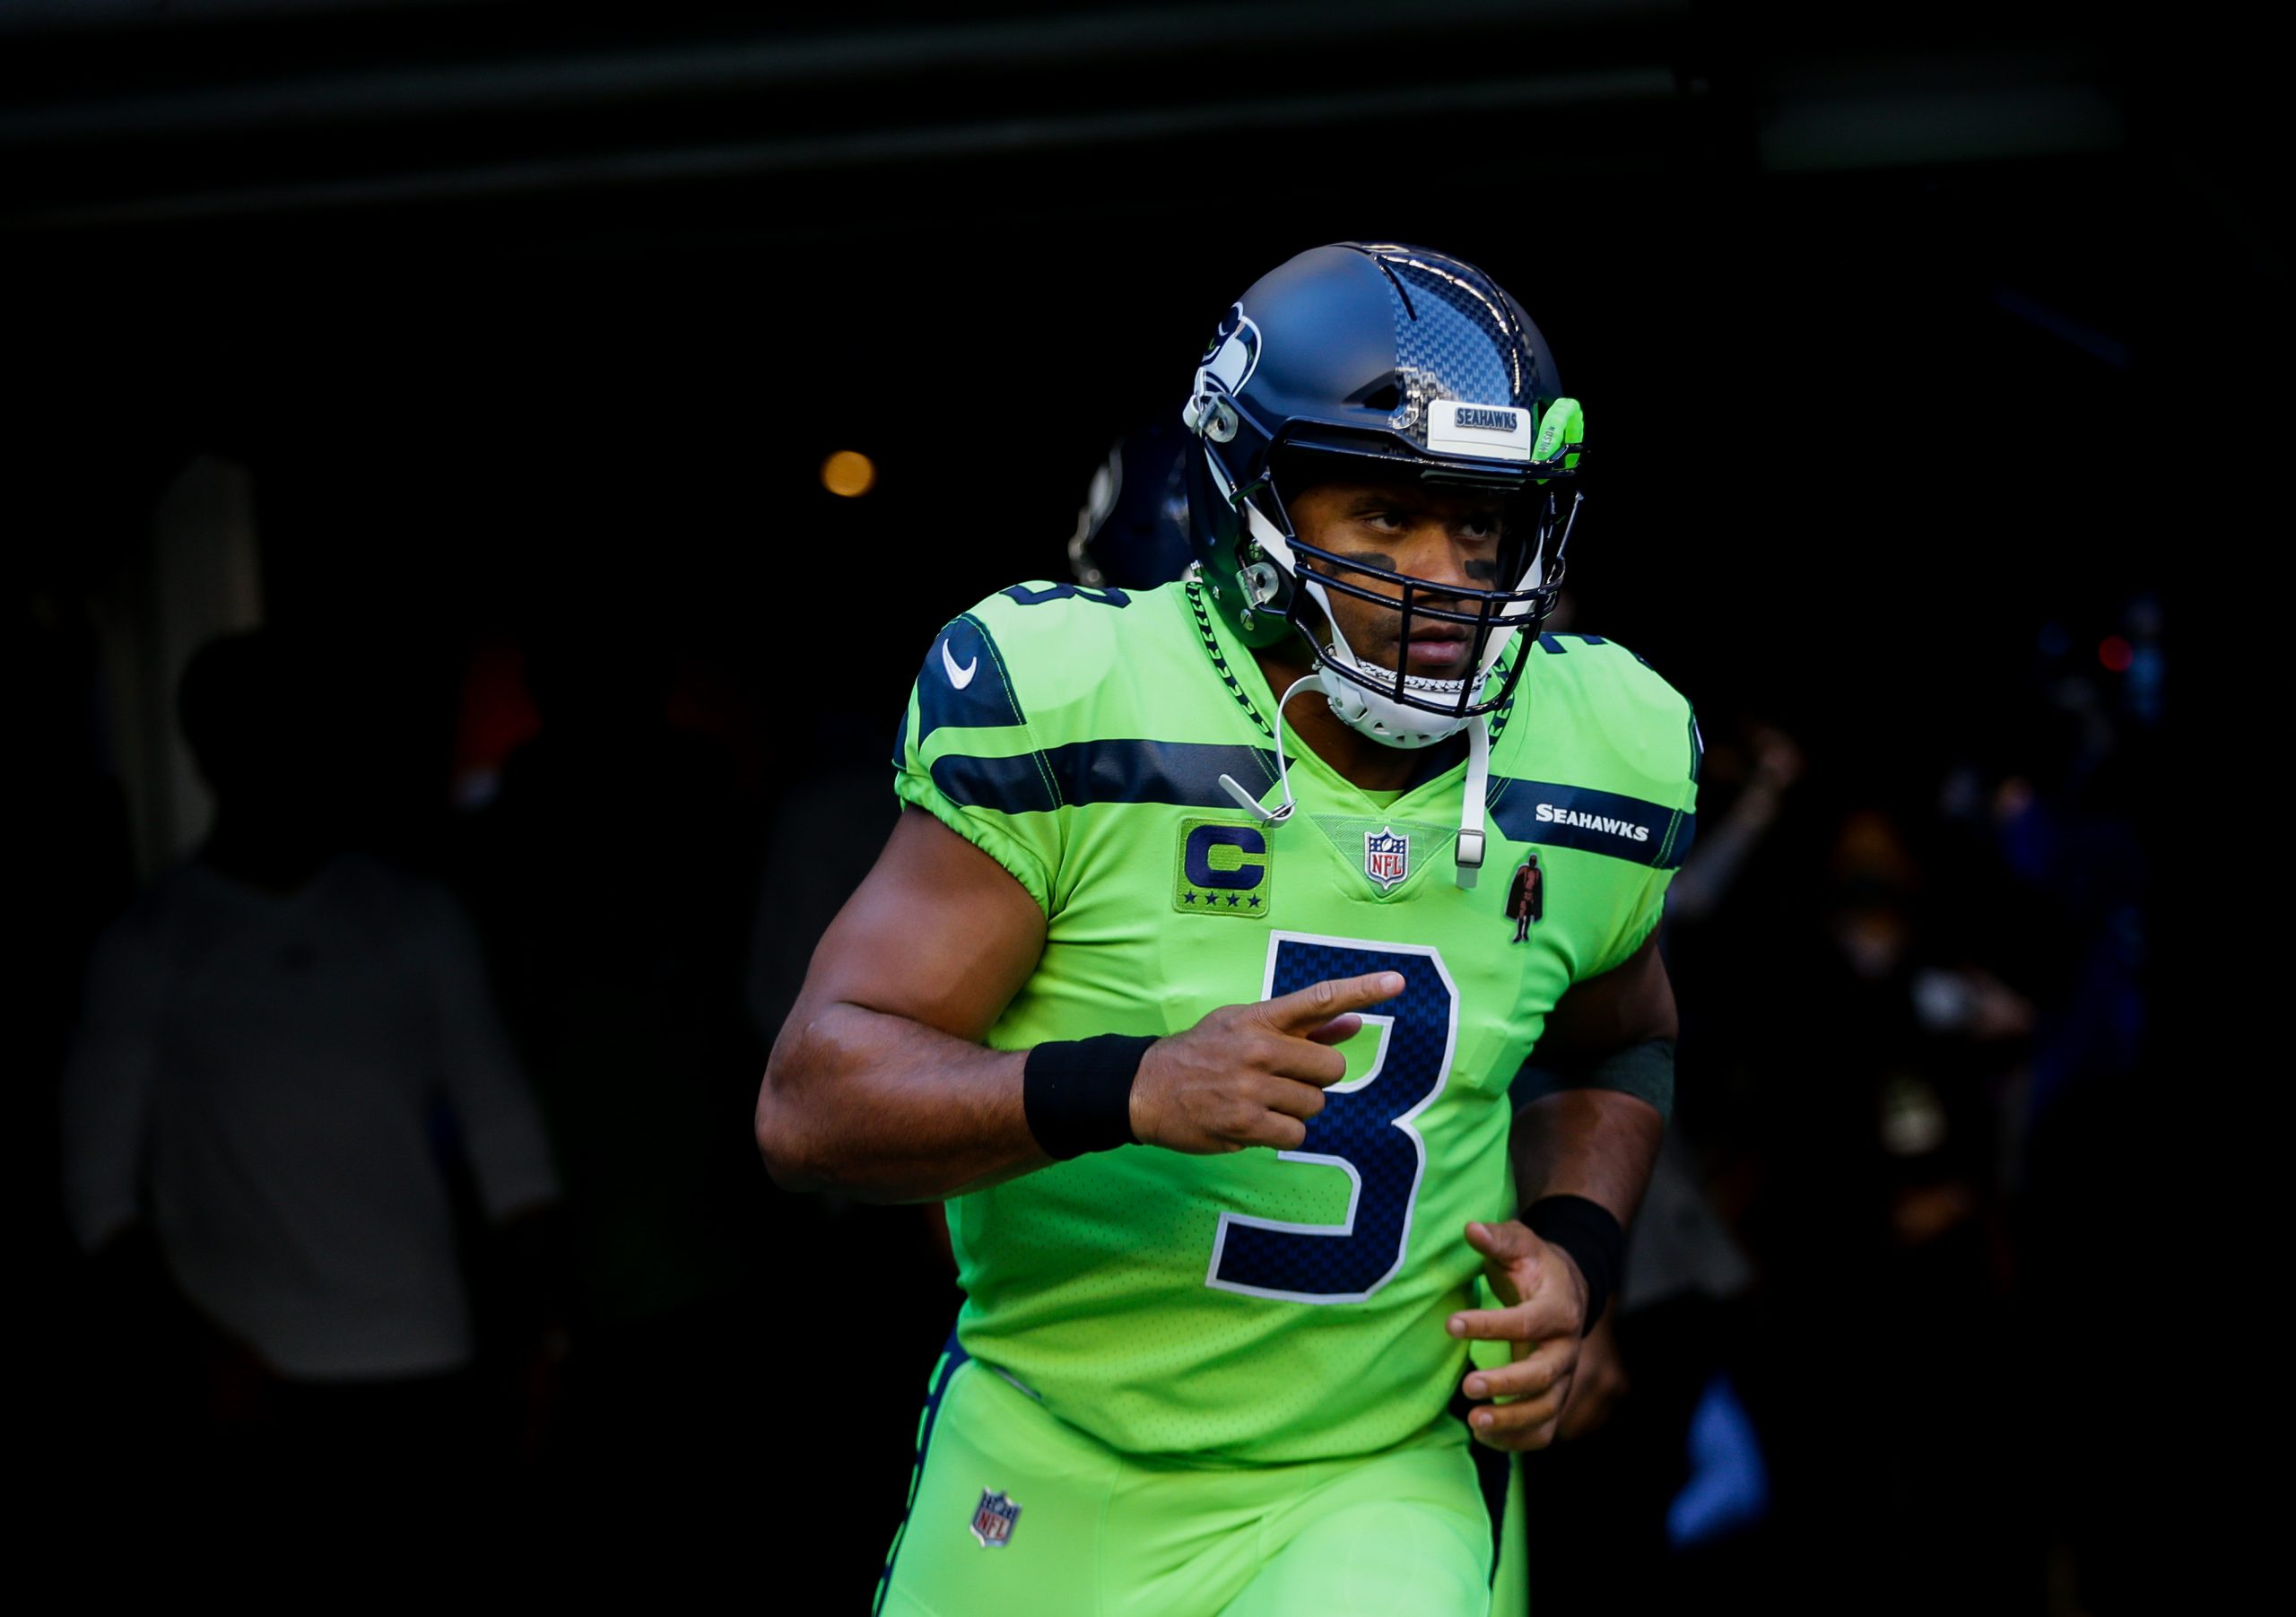 Quarterback Russell Wilson of the Seattle Seahawks runs out for the game against the Los Angeles Rams at Lumen Field on October 7, 2021 in Seattle, Washington. The Russell Wilson contract makes it much easier to trade the QB this offseason.